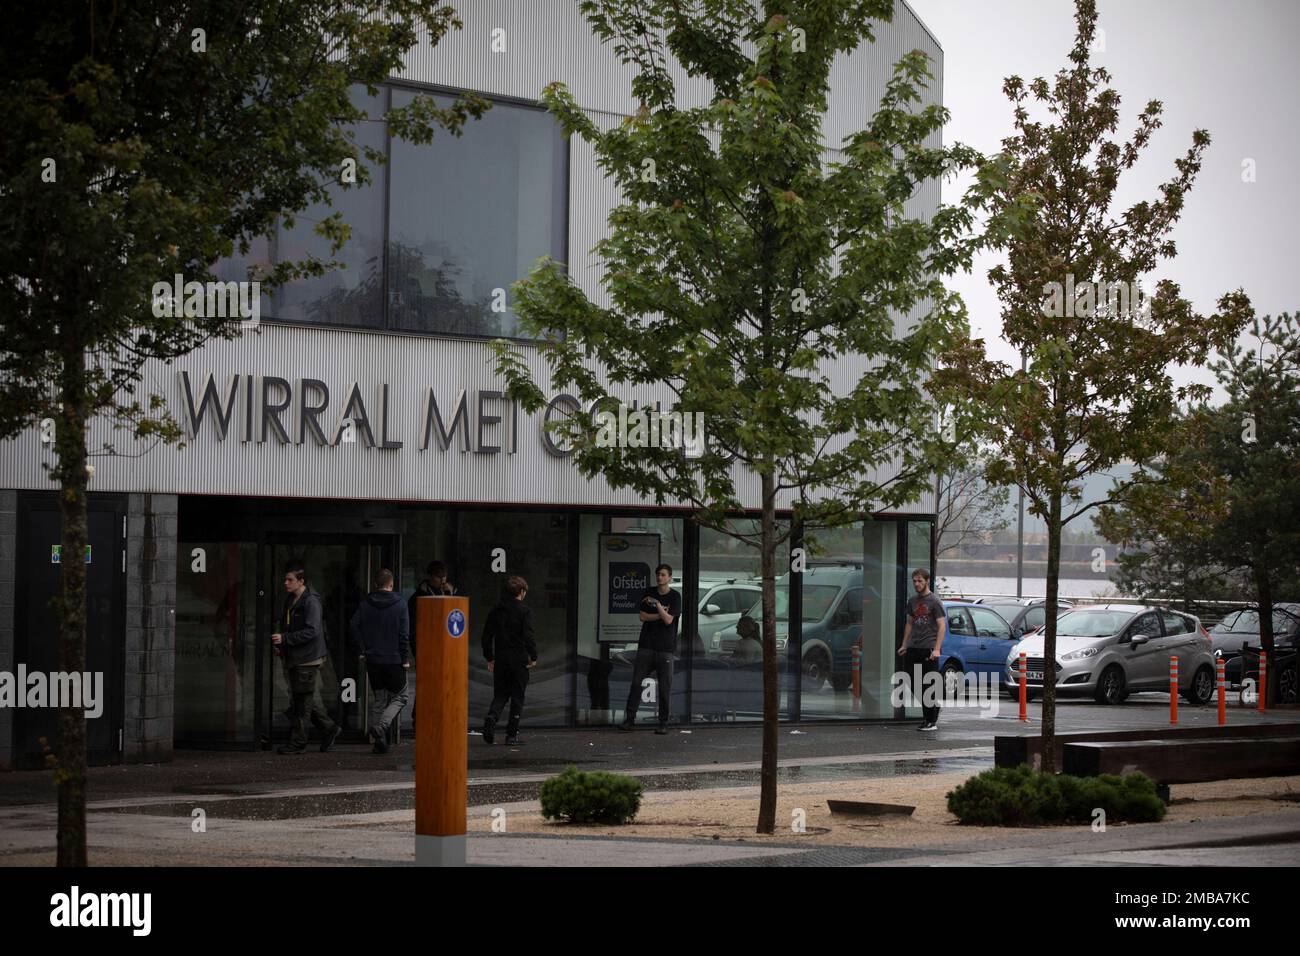 Wirral Met College in Birkenhead, part of the Wirral Waters development on the banks of the river Mersey. Wirral Waters will form part of the Liverpool City Region Freeport, which was announced recently by the Conservative government. Stock Photo